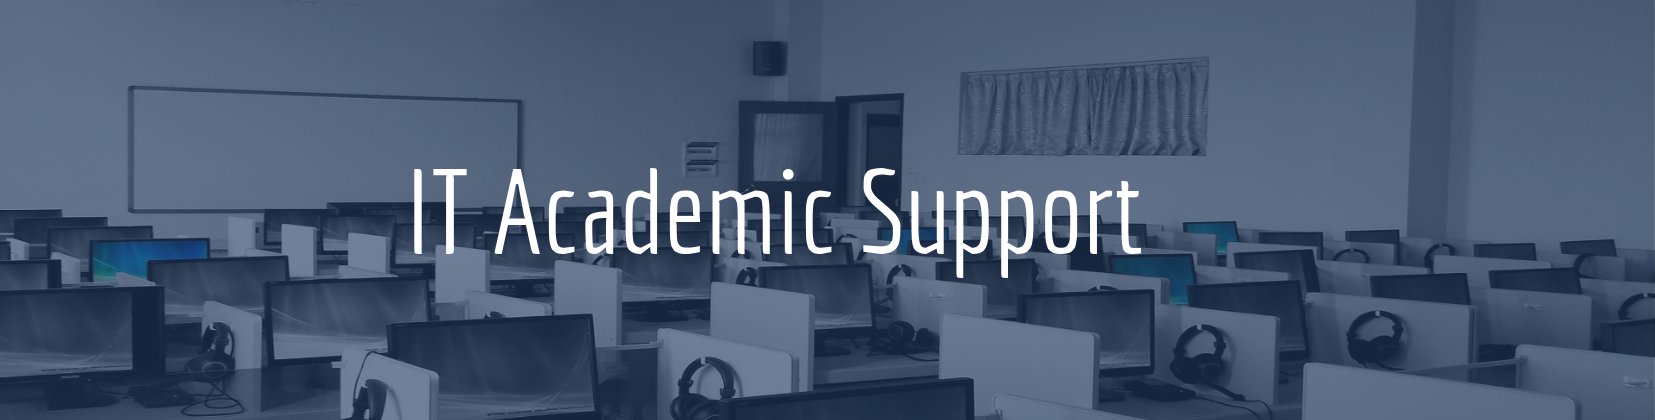 IT Academic Support Banner